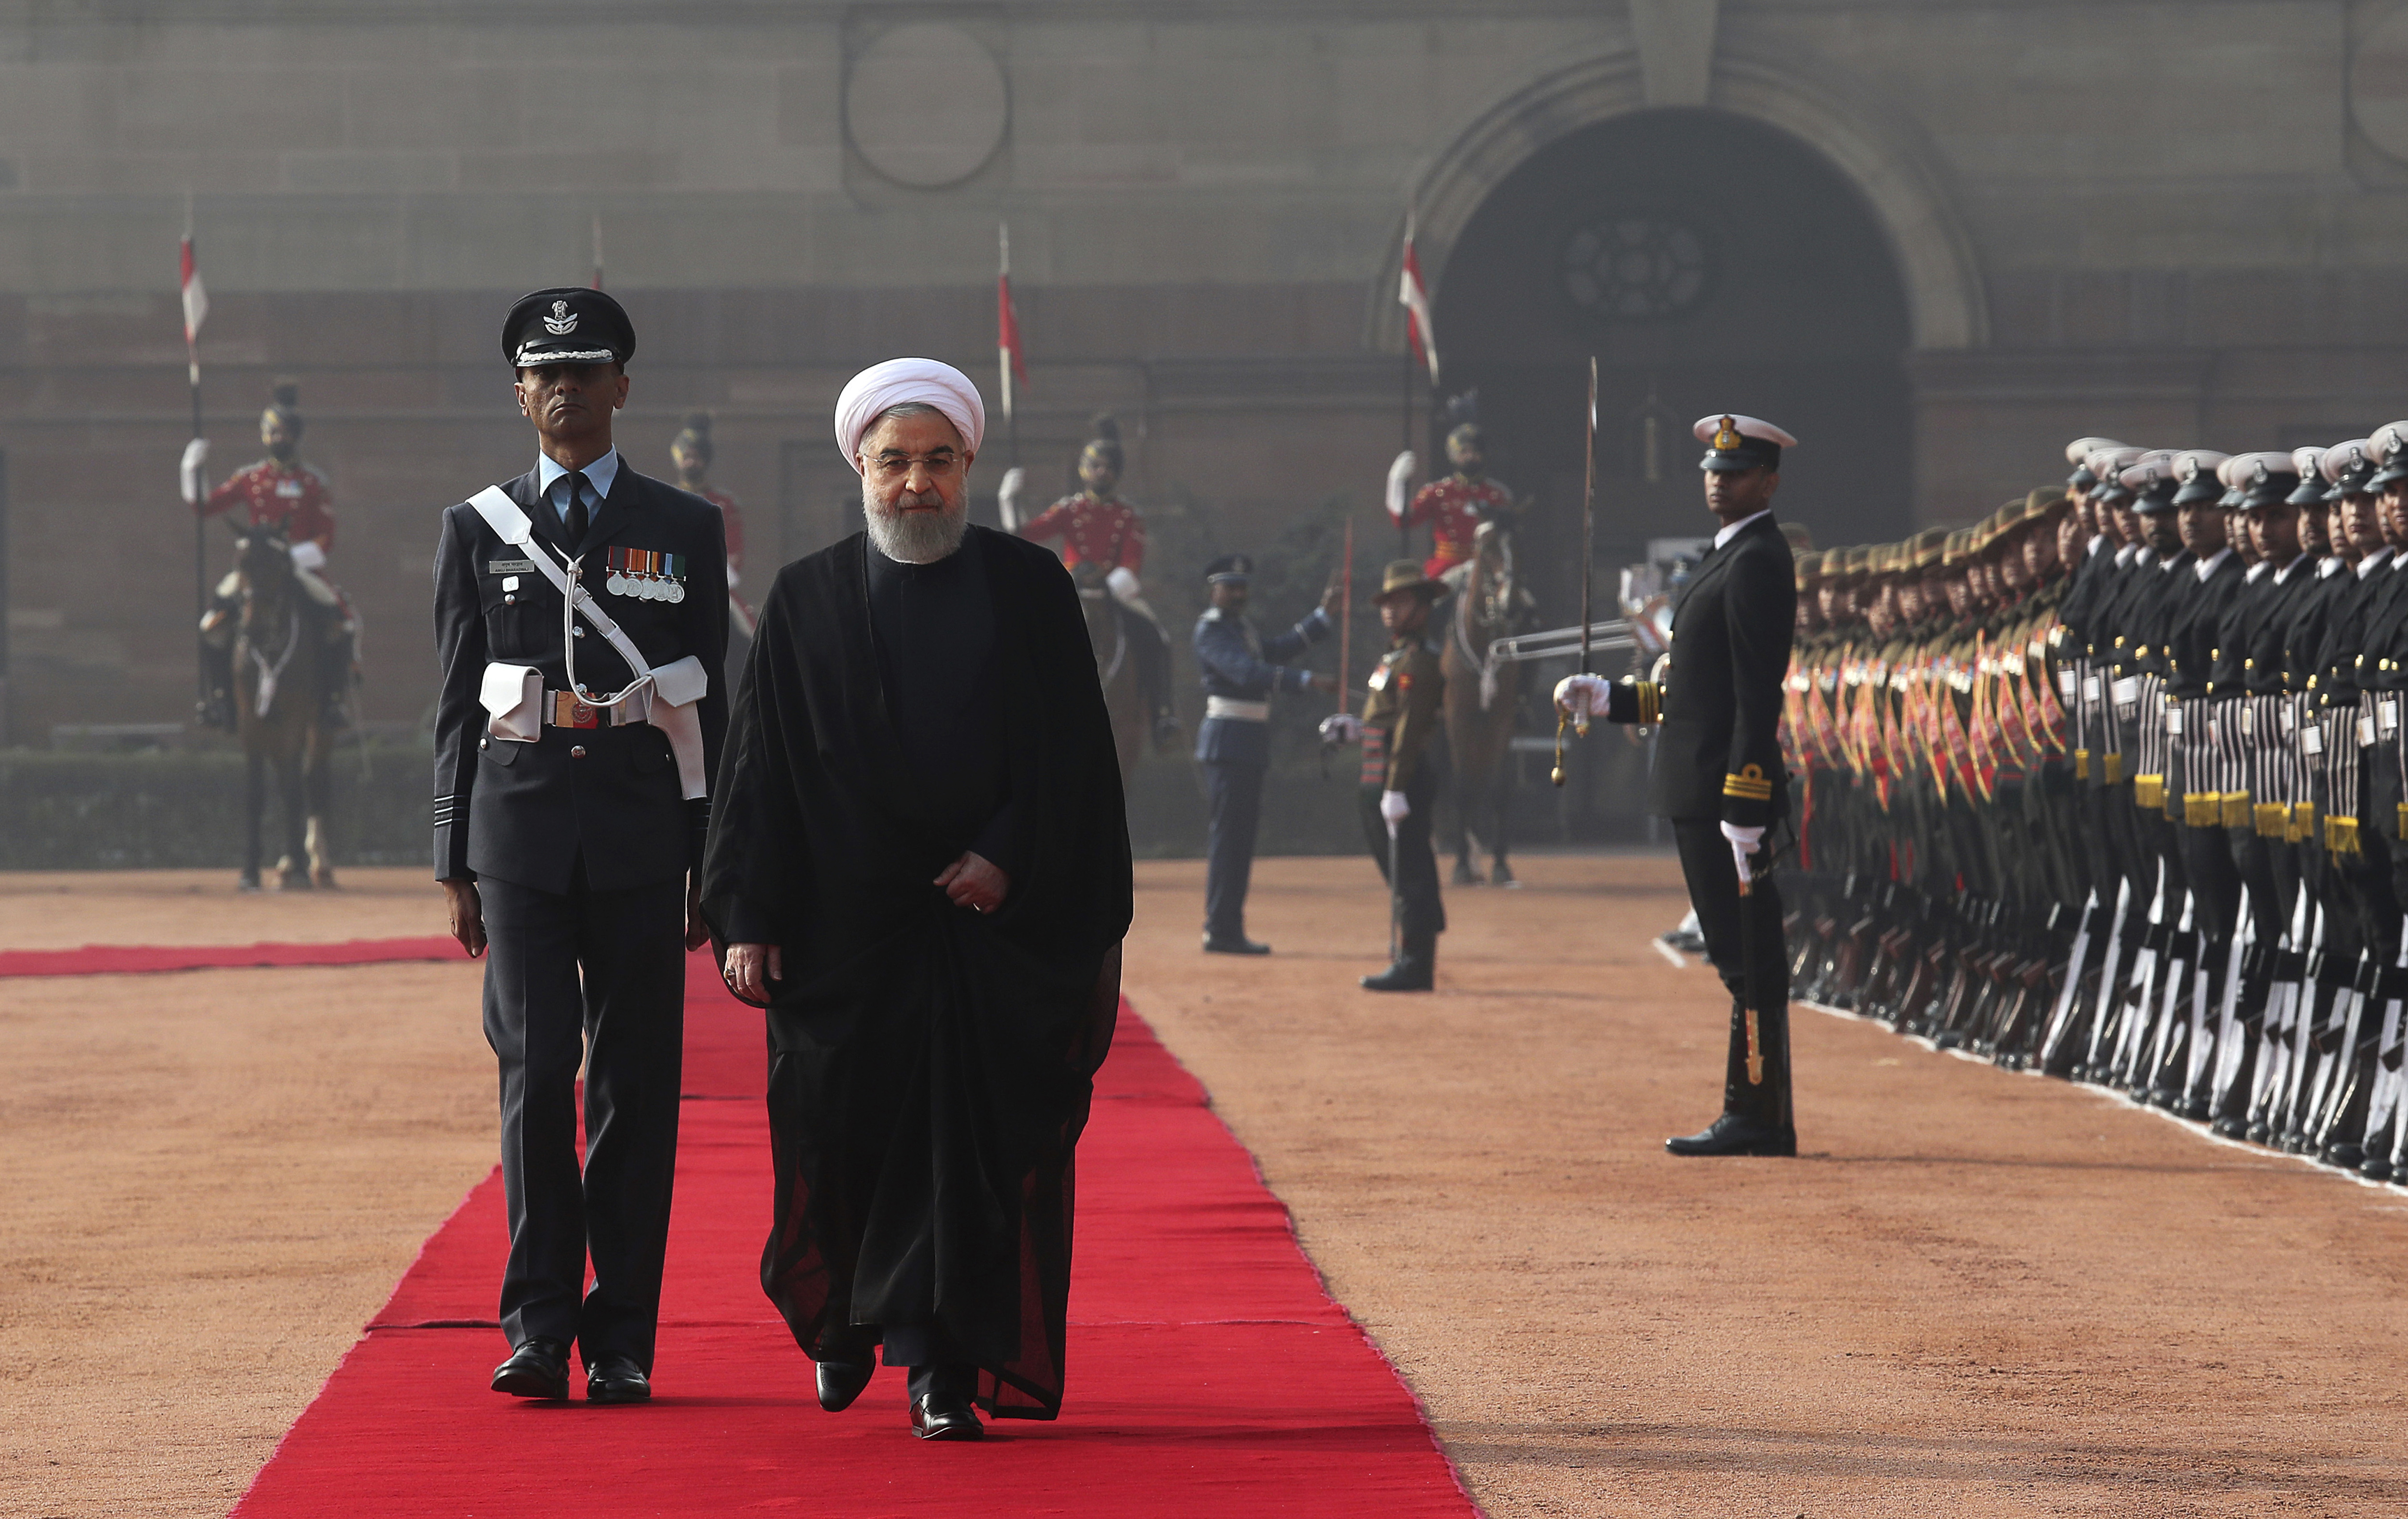 Iranian President Hassan Rouhani inspects a joint military guard of honor during his ceremonial reception at the Indian presidential palace, in New Delhi, India, Saturday, Feb. 17, 2018. Rouhani, who is on three days state visit to India has strongly criticized the Trump administration's recognition of Jerusalem as Israel's capital and urged Muslims to support the Palestinian cause. (AP Photo/Manish Swarup)